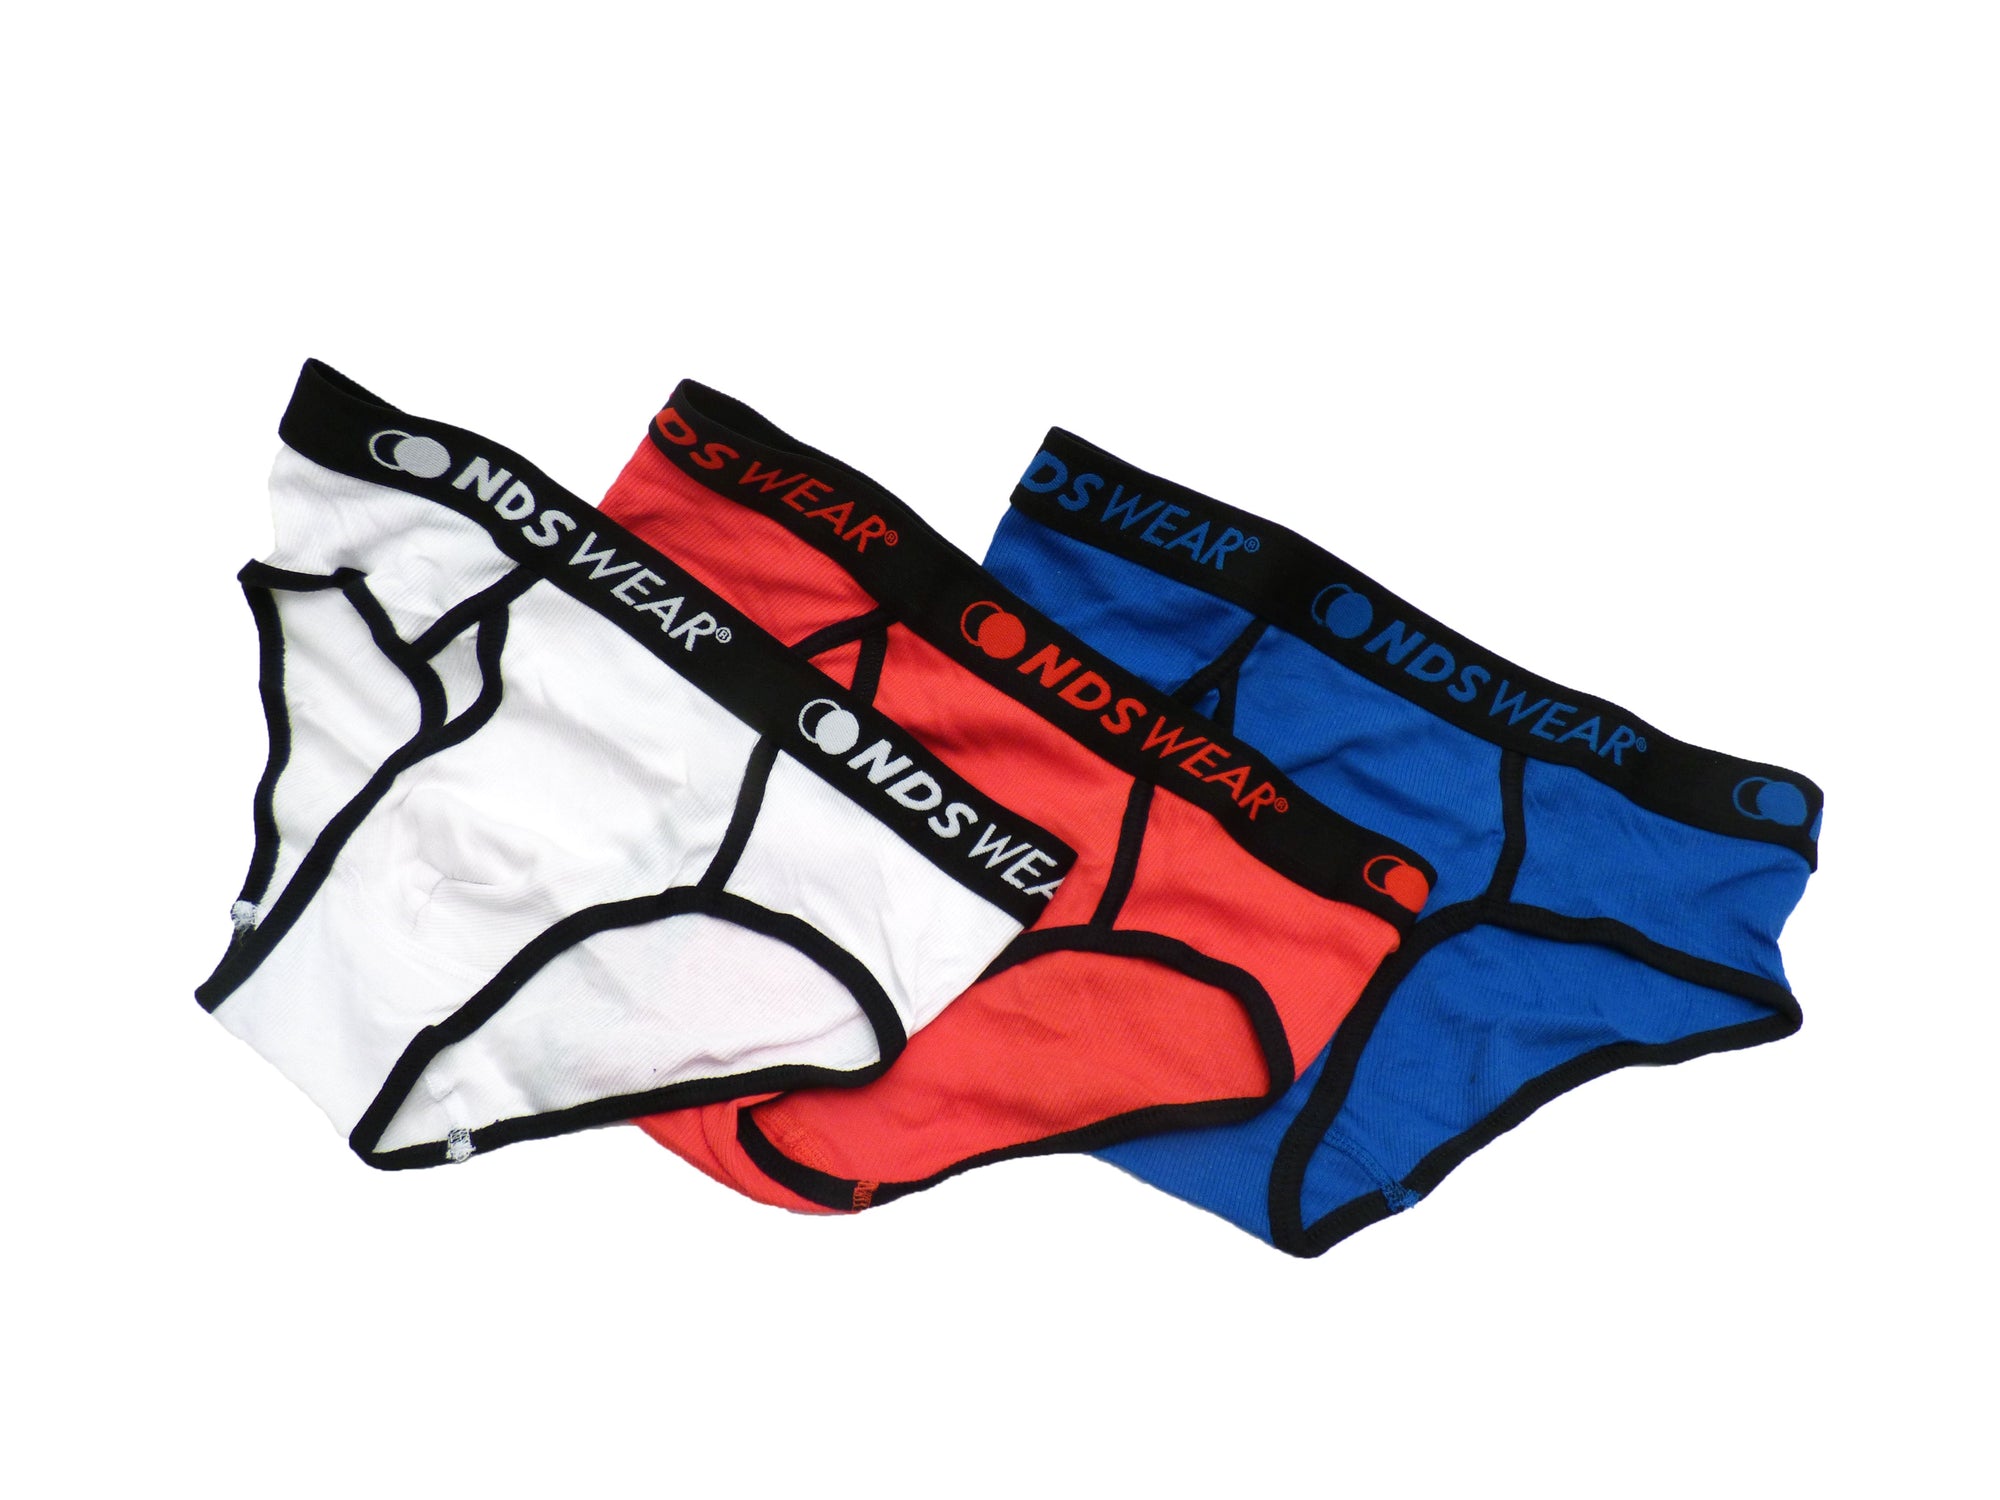 Ribbed Pouch Brief - 3 PACK Underwear for men by NDS Wear - ABC